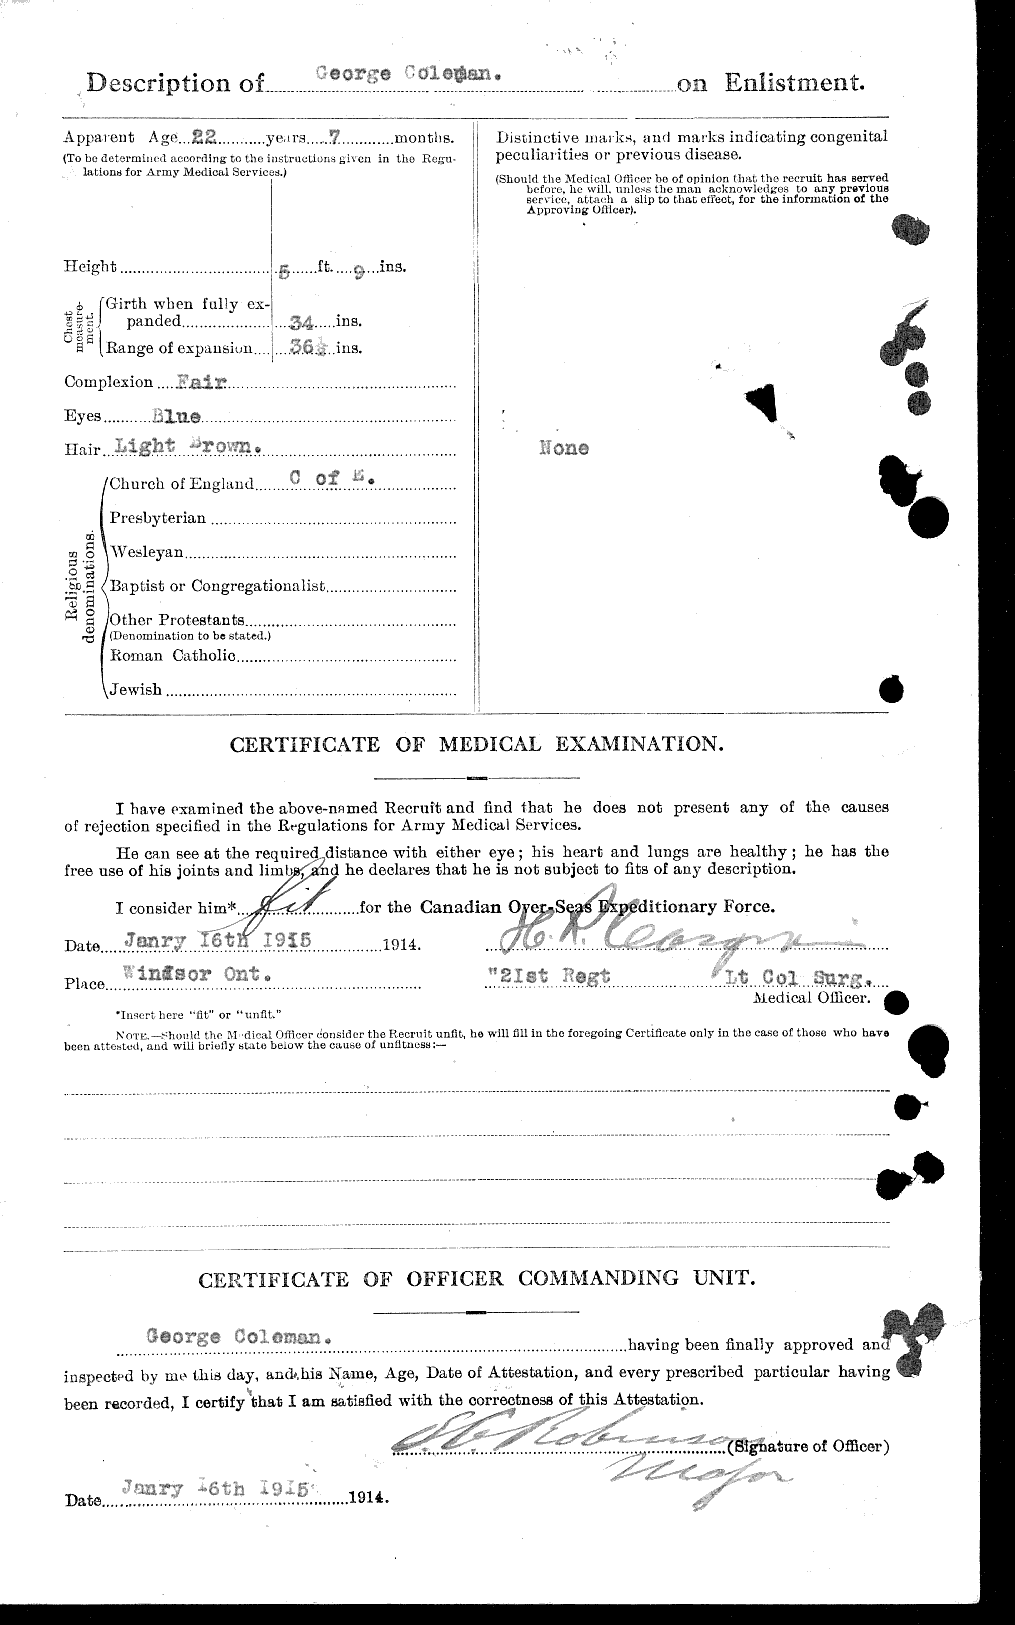 Personnel Records of the First World War - CEF 028146b